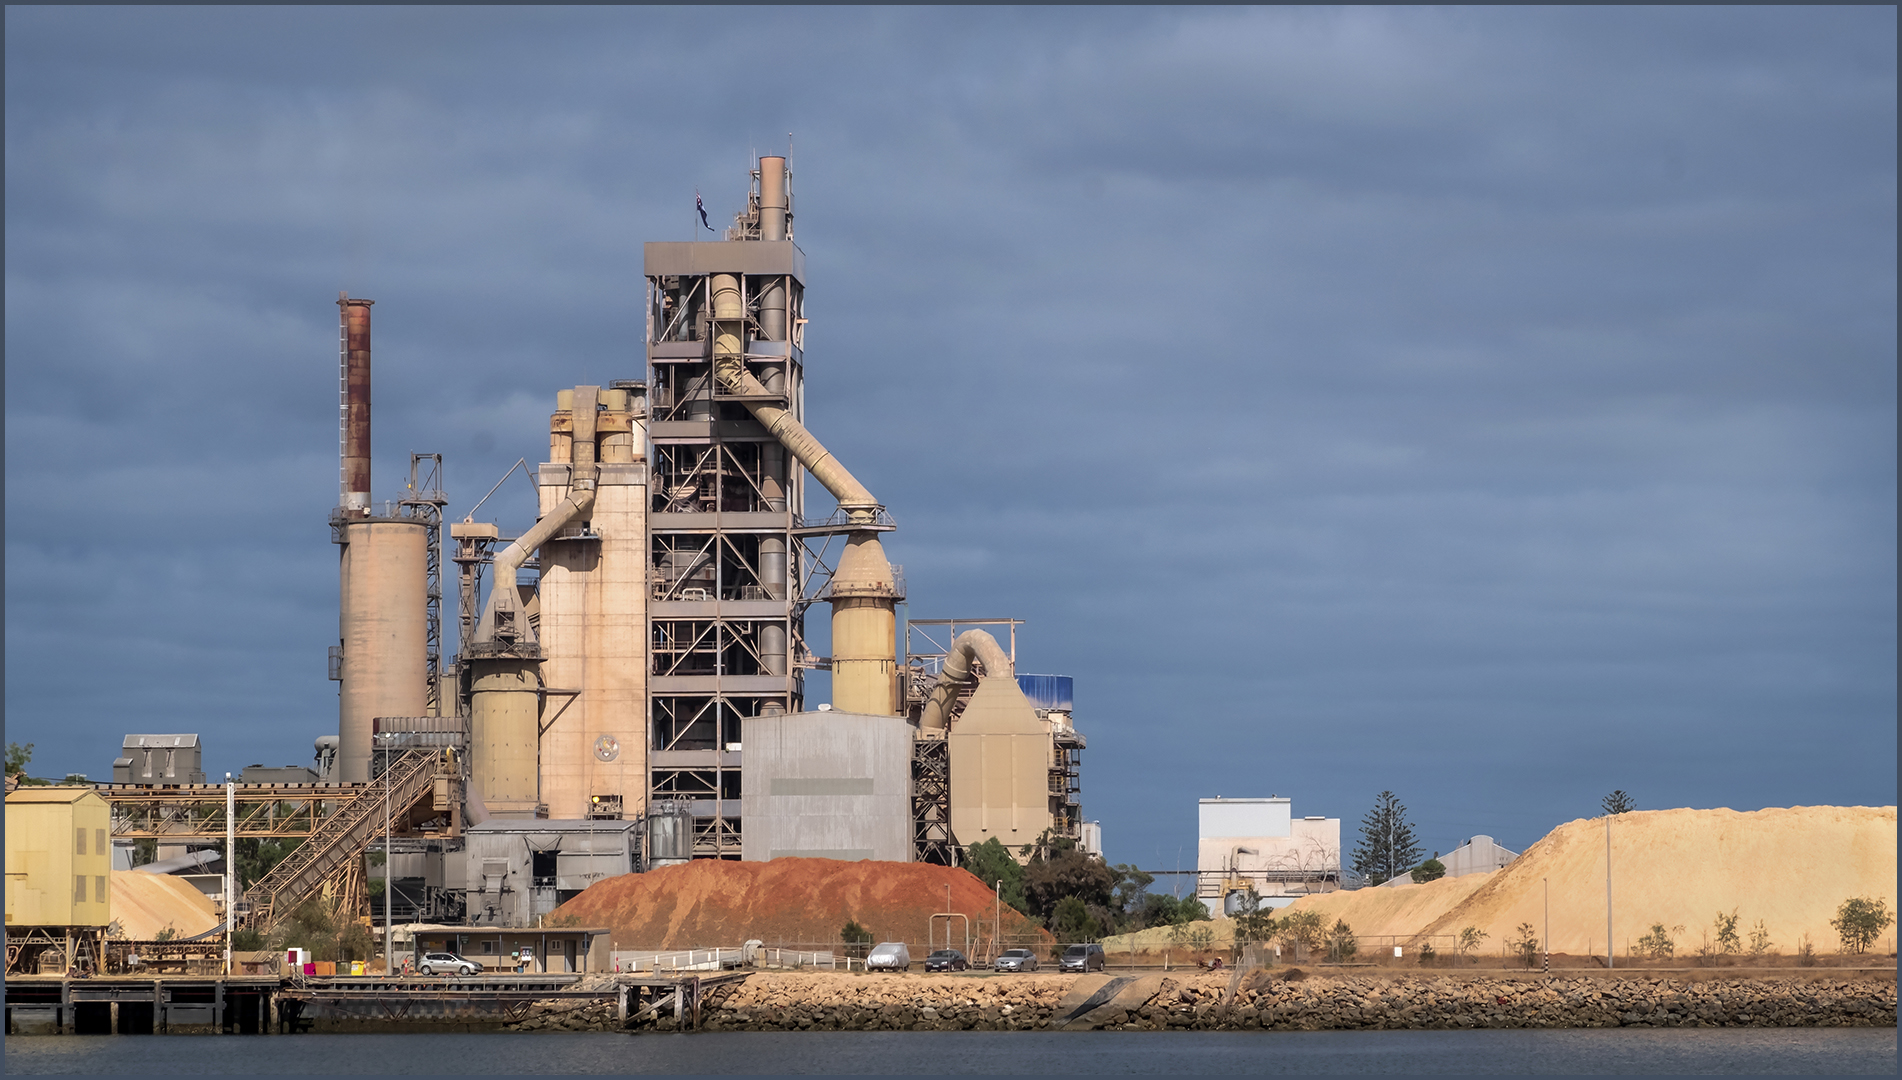 Pauline Mosel Sand Crushing Merit February 2019   Industrial scapes